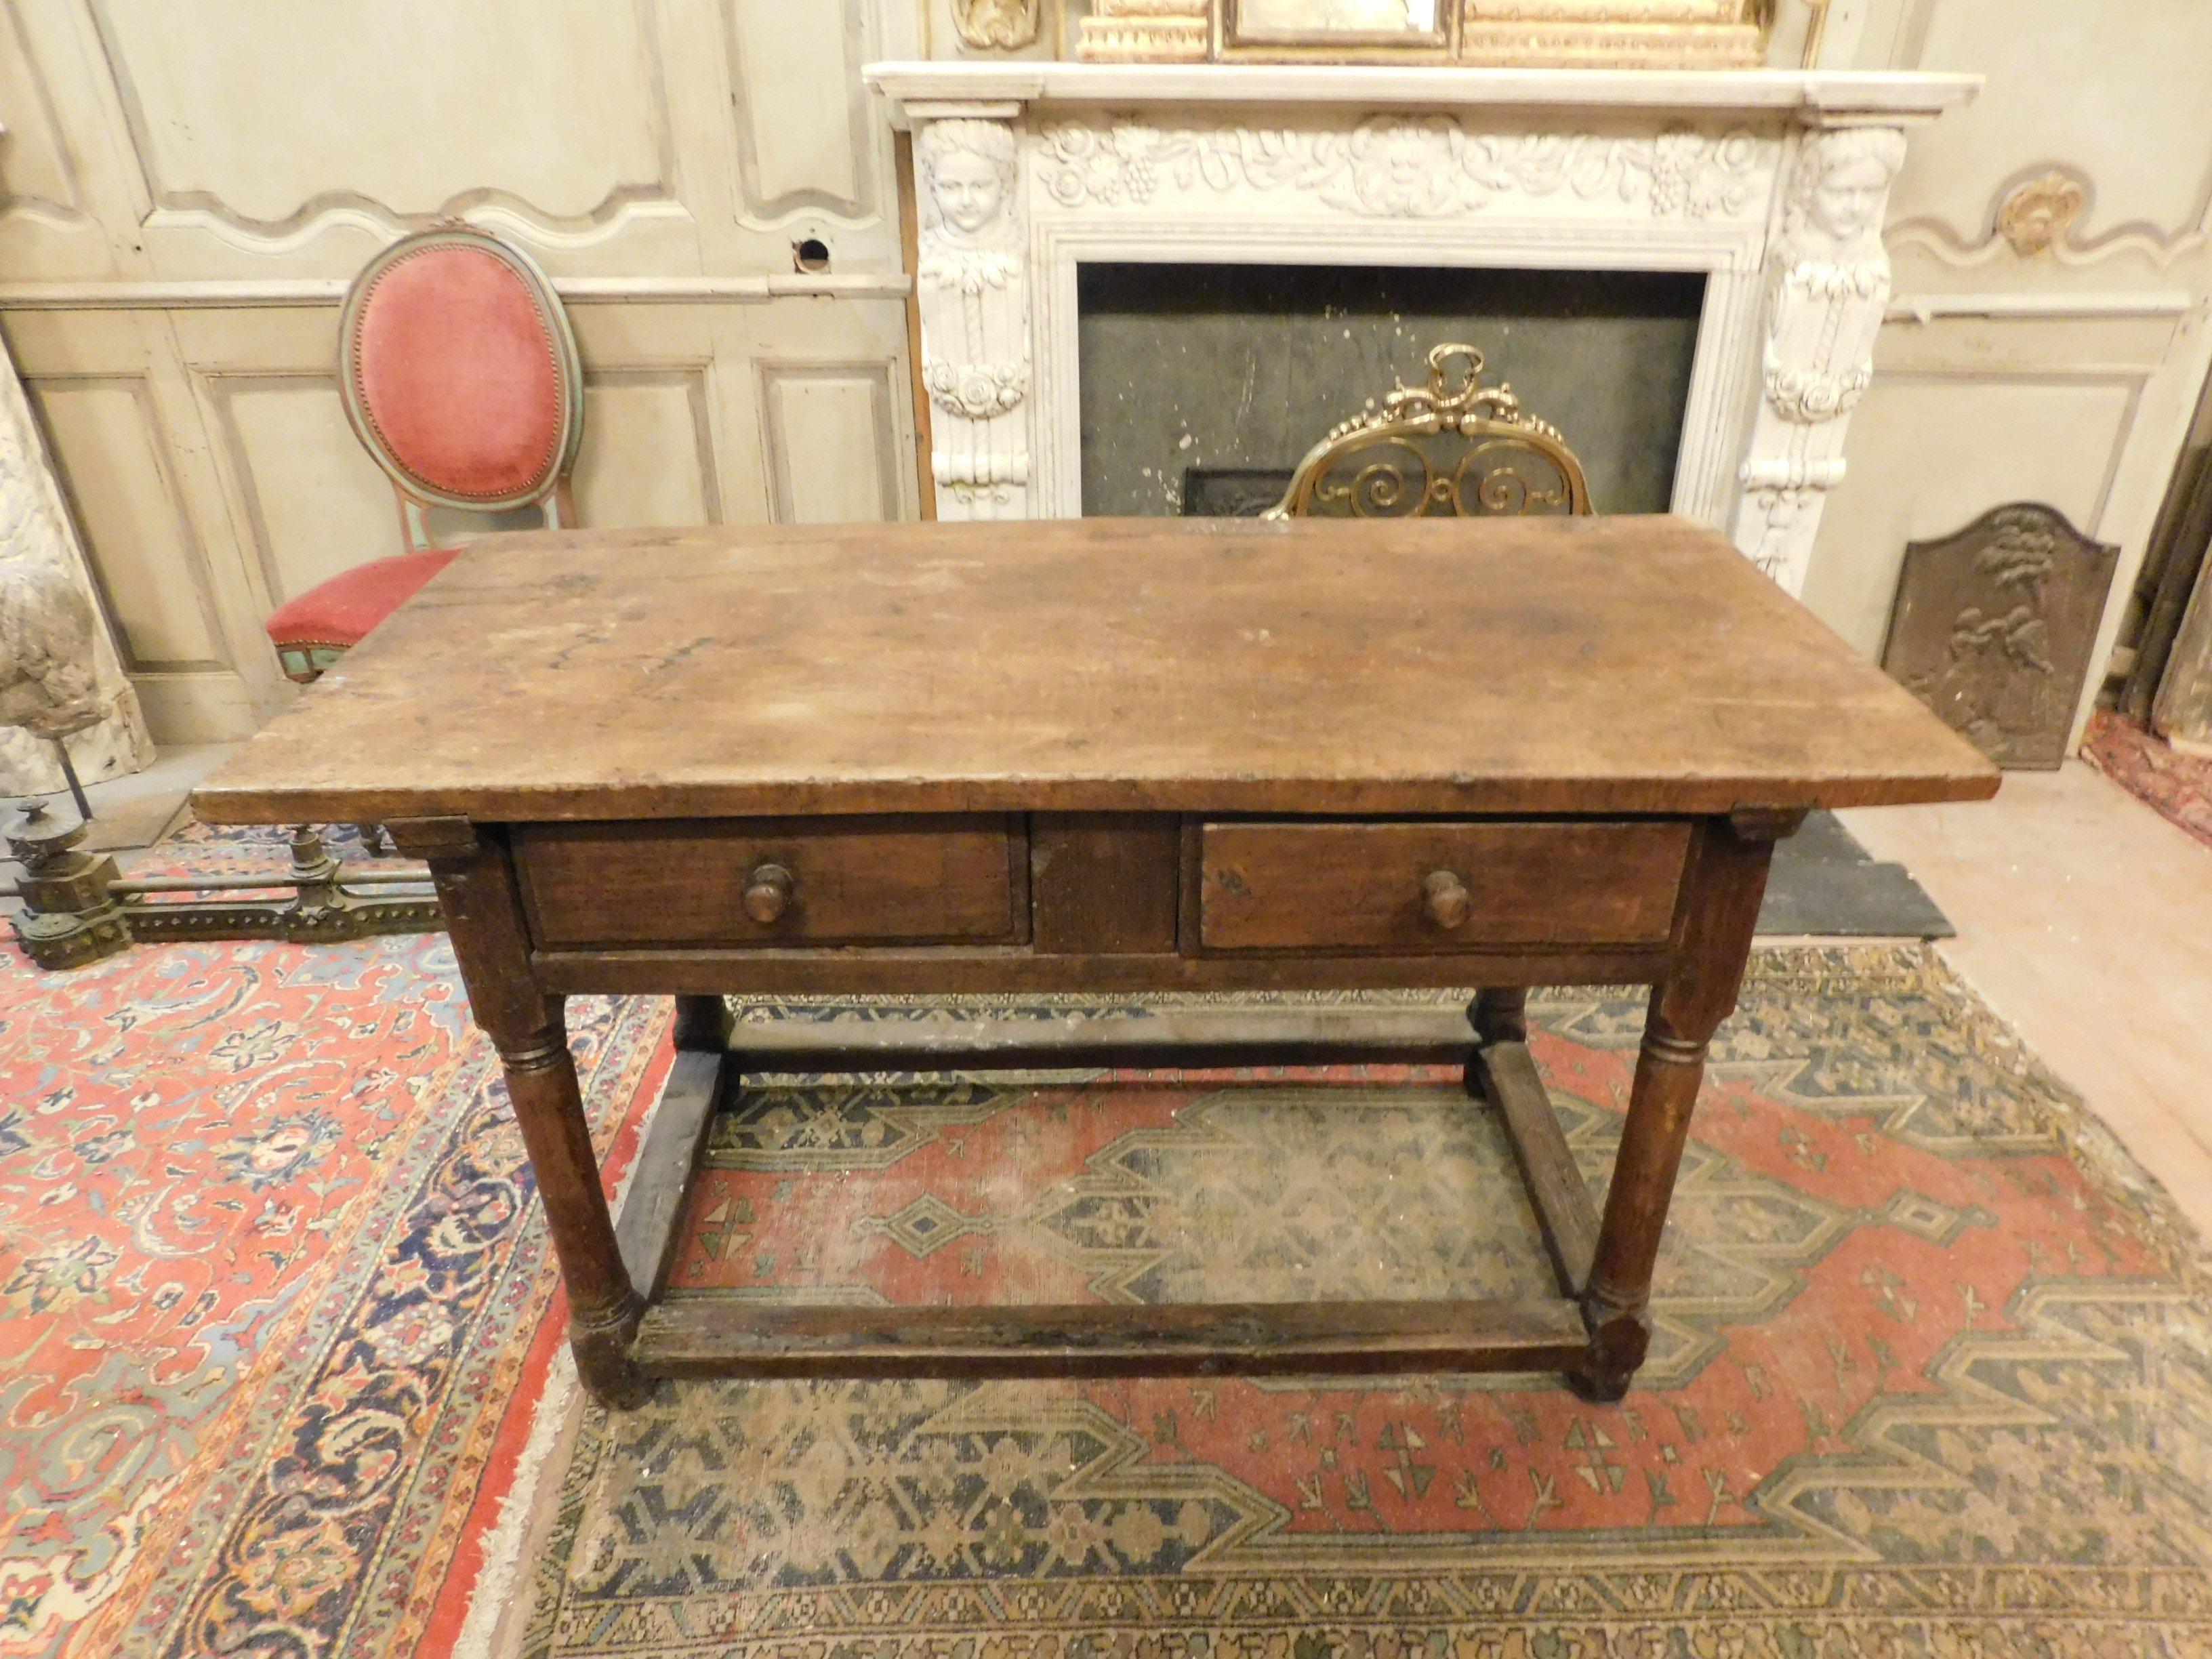 Antique chestnut dining table, single plank with 2 drawers and turned legs with boards under the legs of the junction table, hand-built in the 17th century, from Italy.
Measure cm w 140 x H 78 x d 65, leg space under the table H 54.
Ideal for both